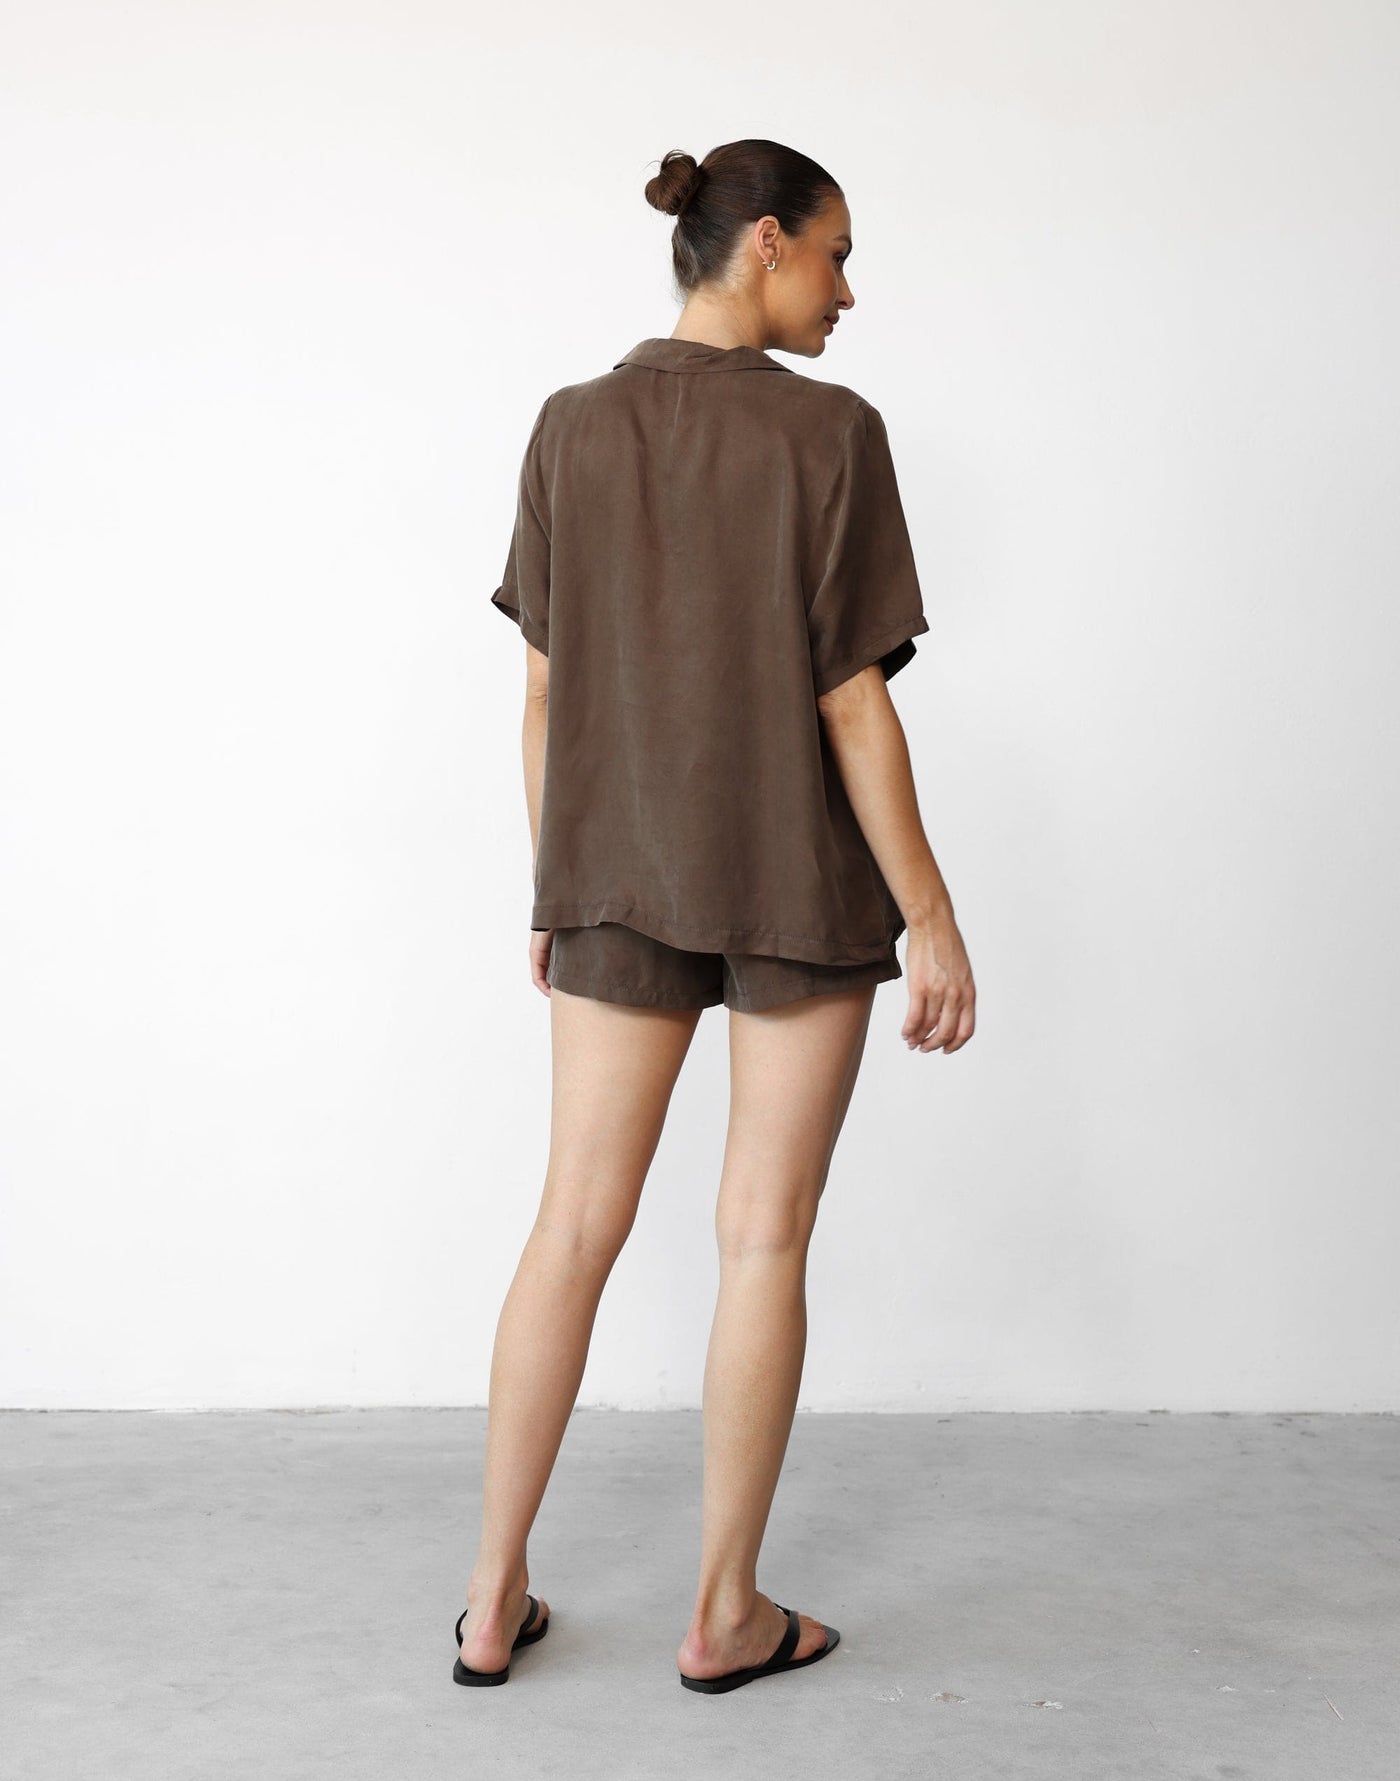 Minni Shirt (Chocolate) - Cupro Relaxed Fit Button Down Shirt - Women's Top - Charcoal Clothing